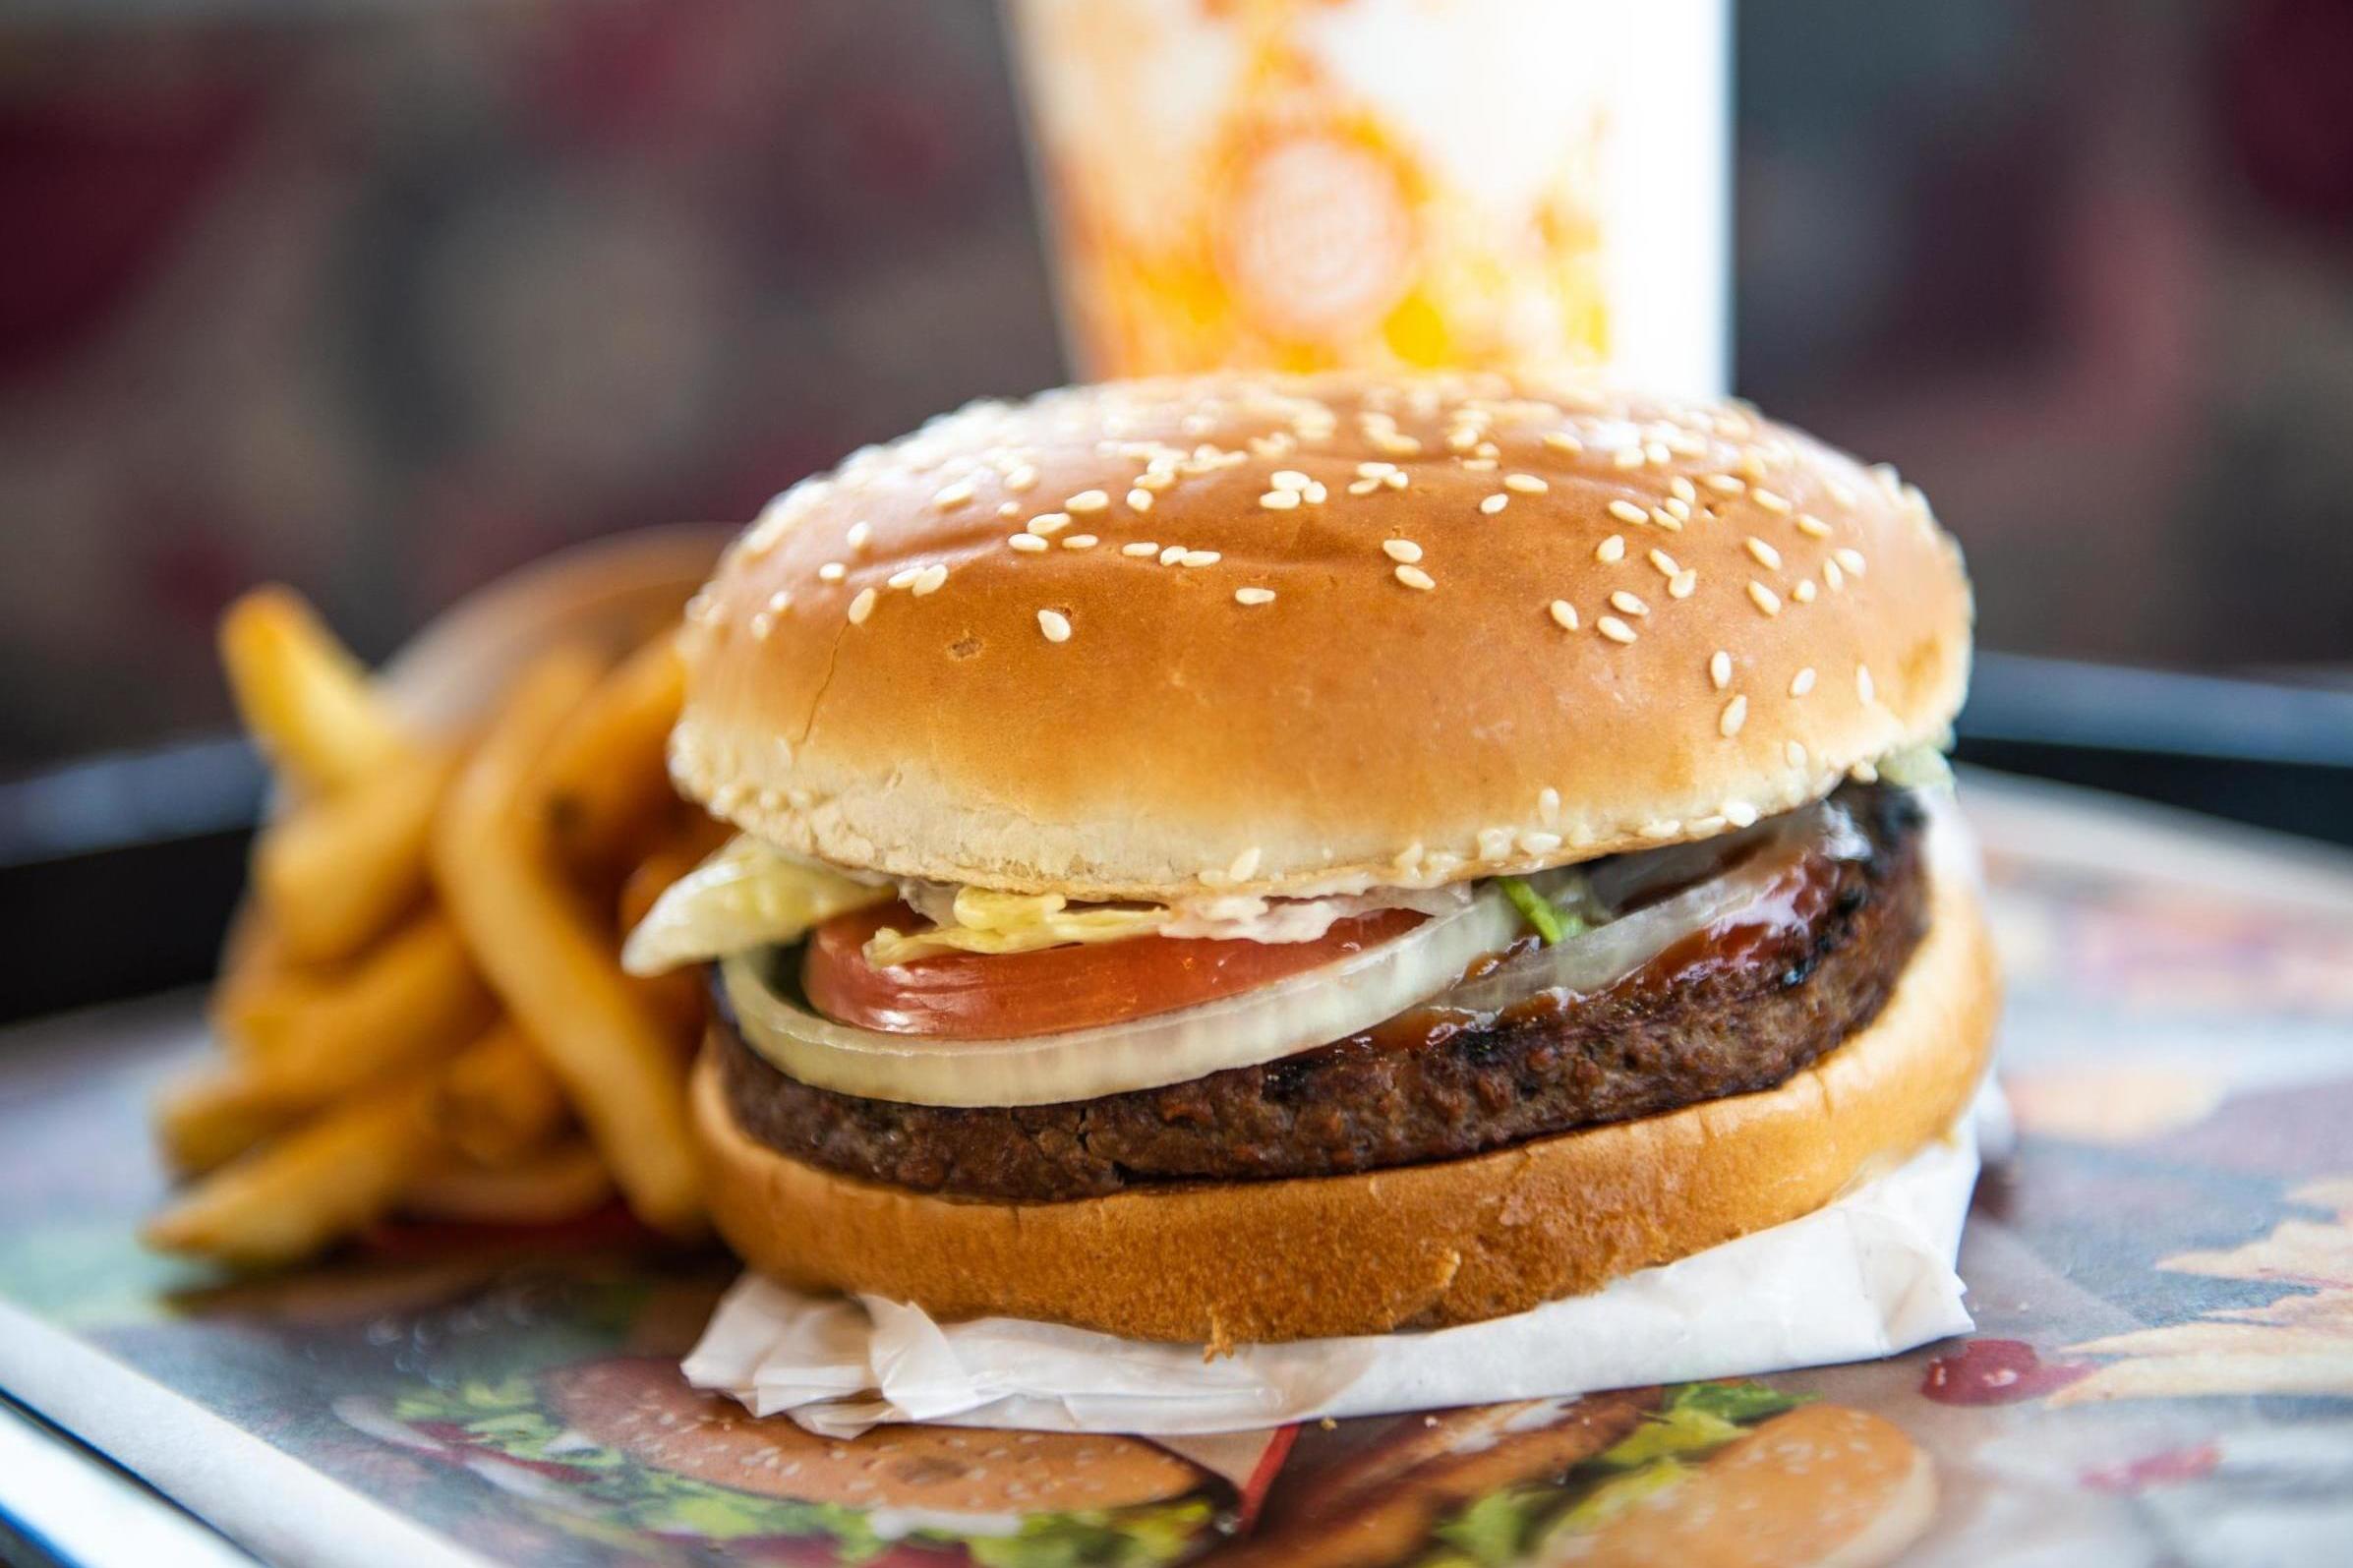 Burger King being sued for cooking Impossible Whopper with meat